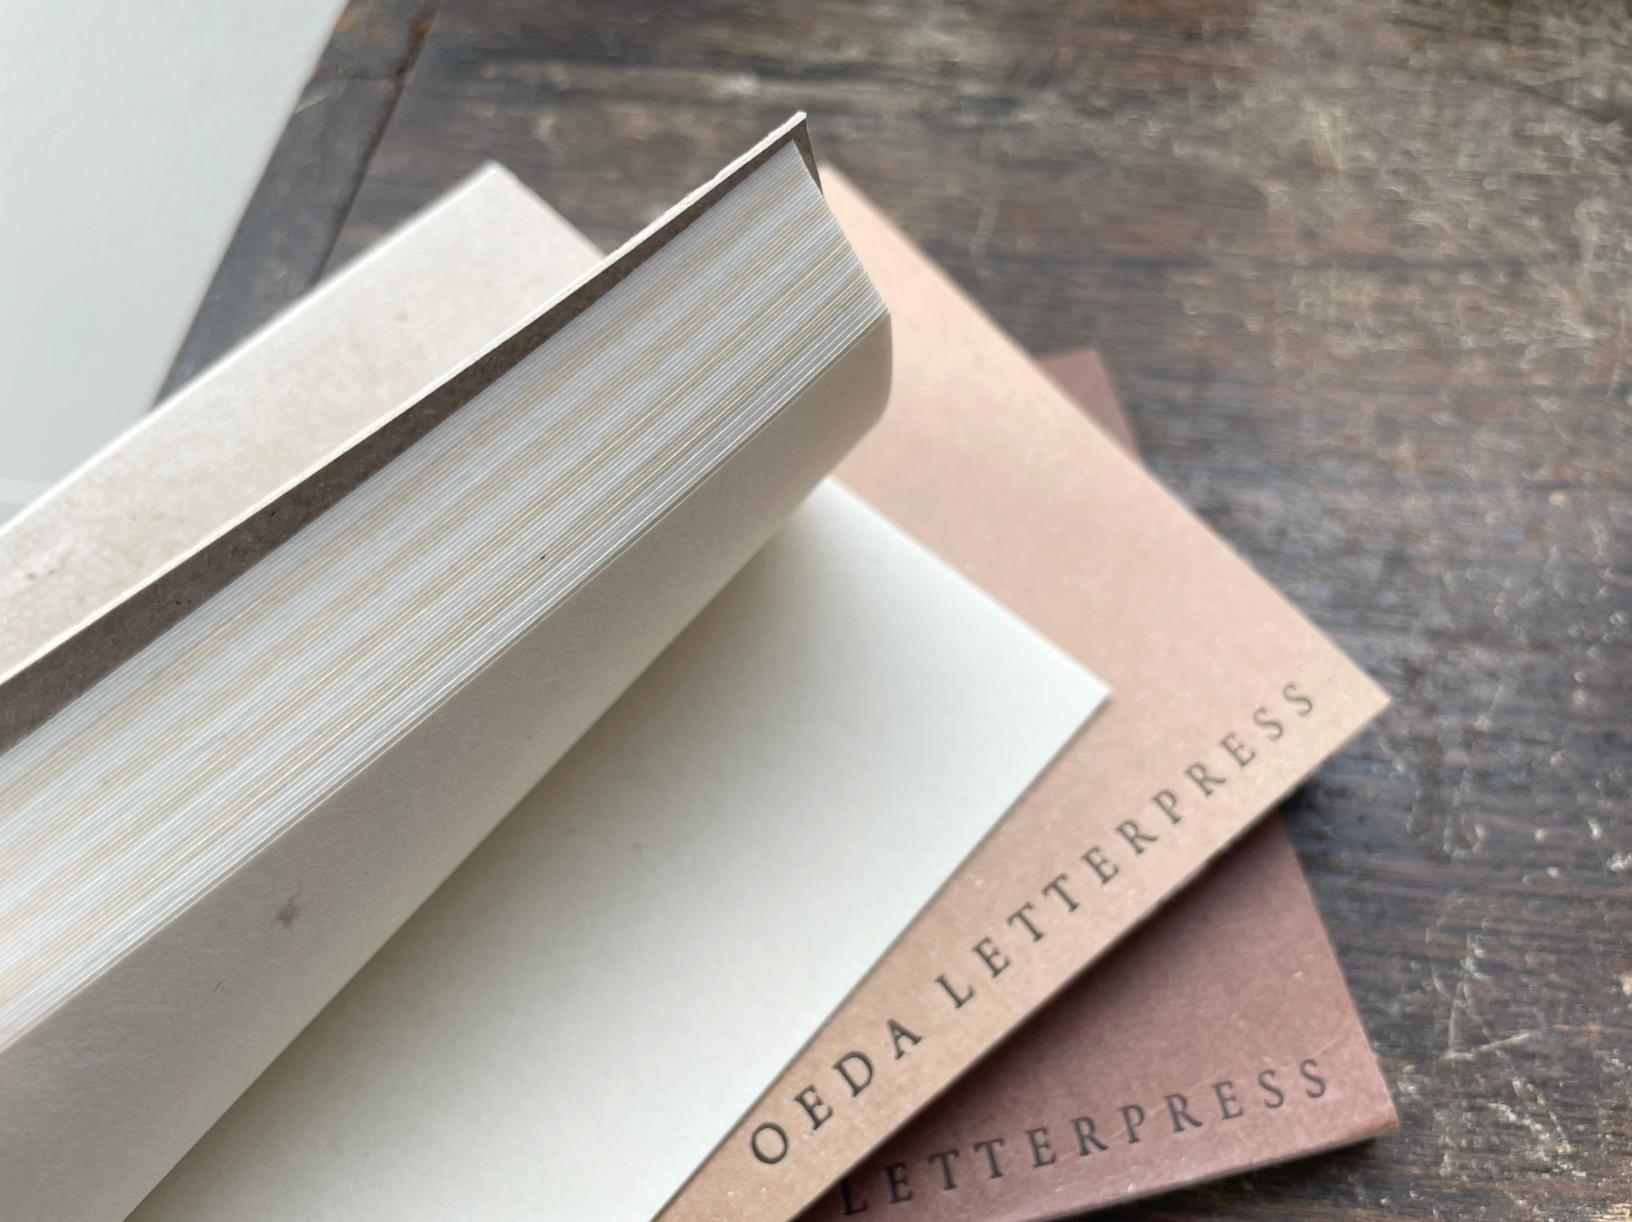 Mini Two color paper notebook（brown・craft・beige）